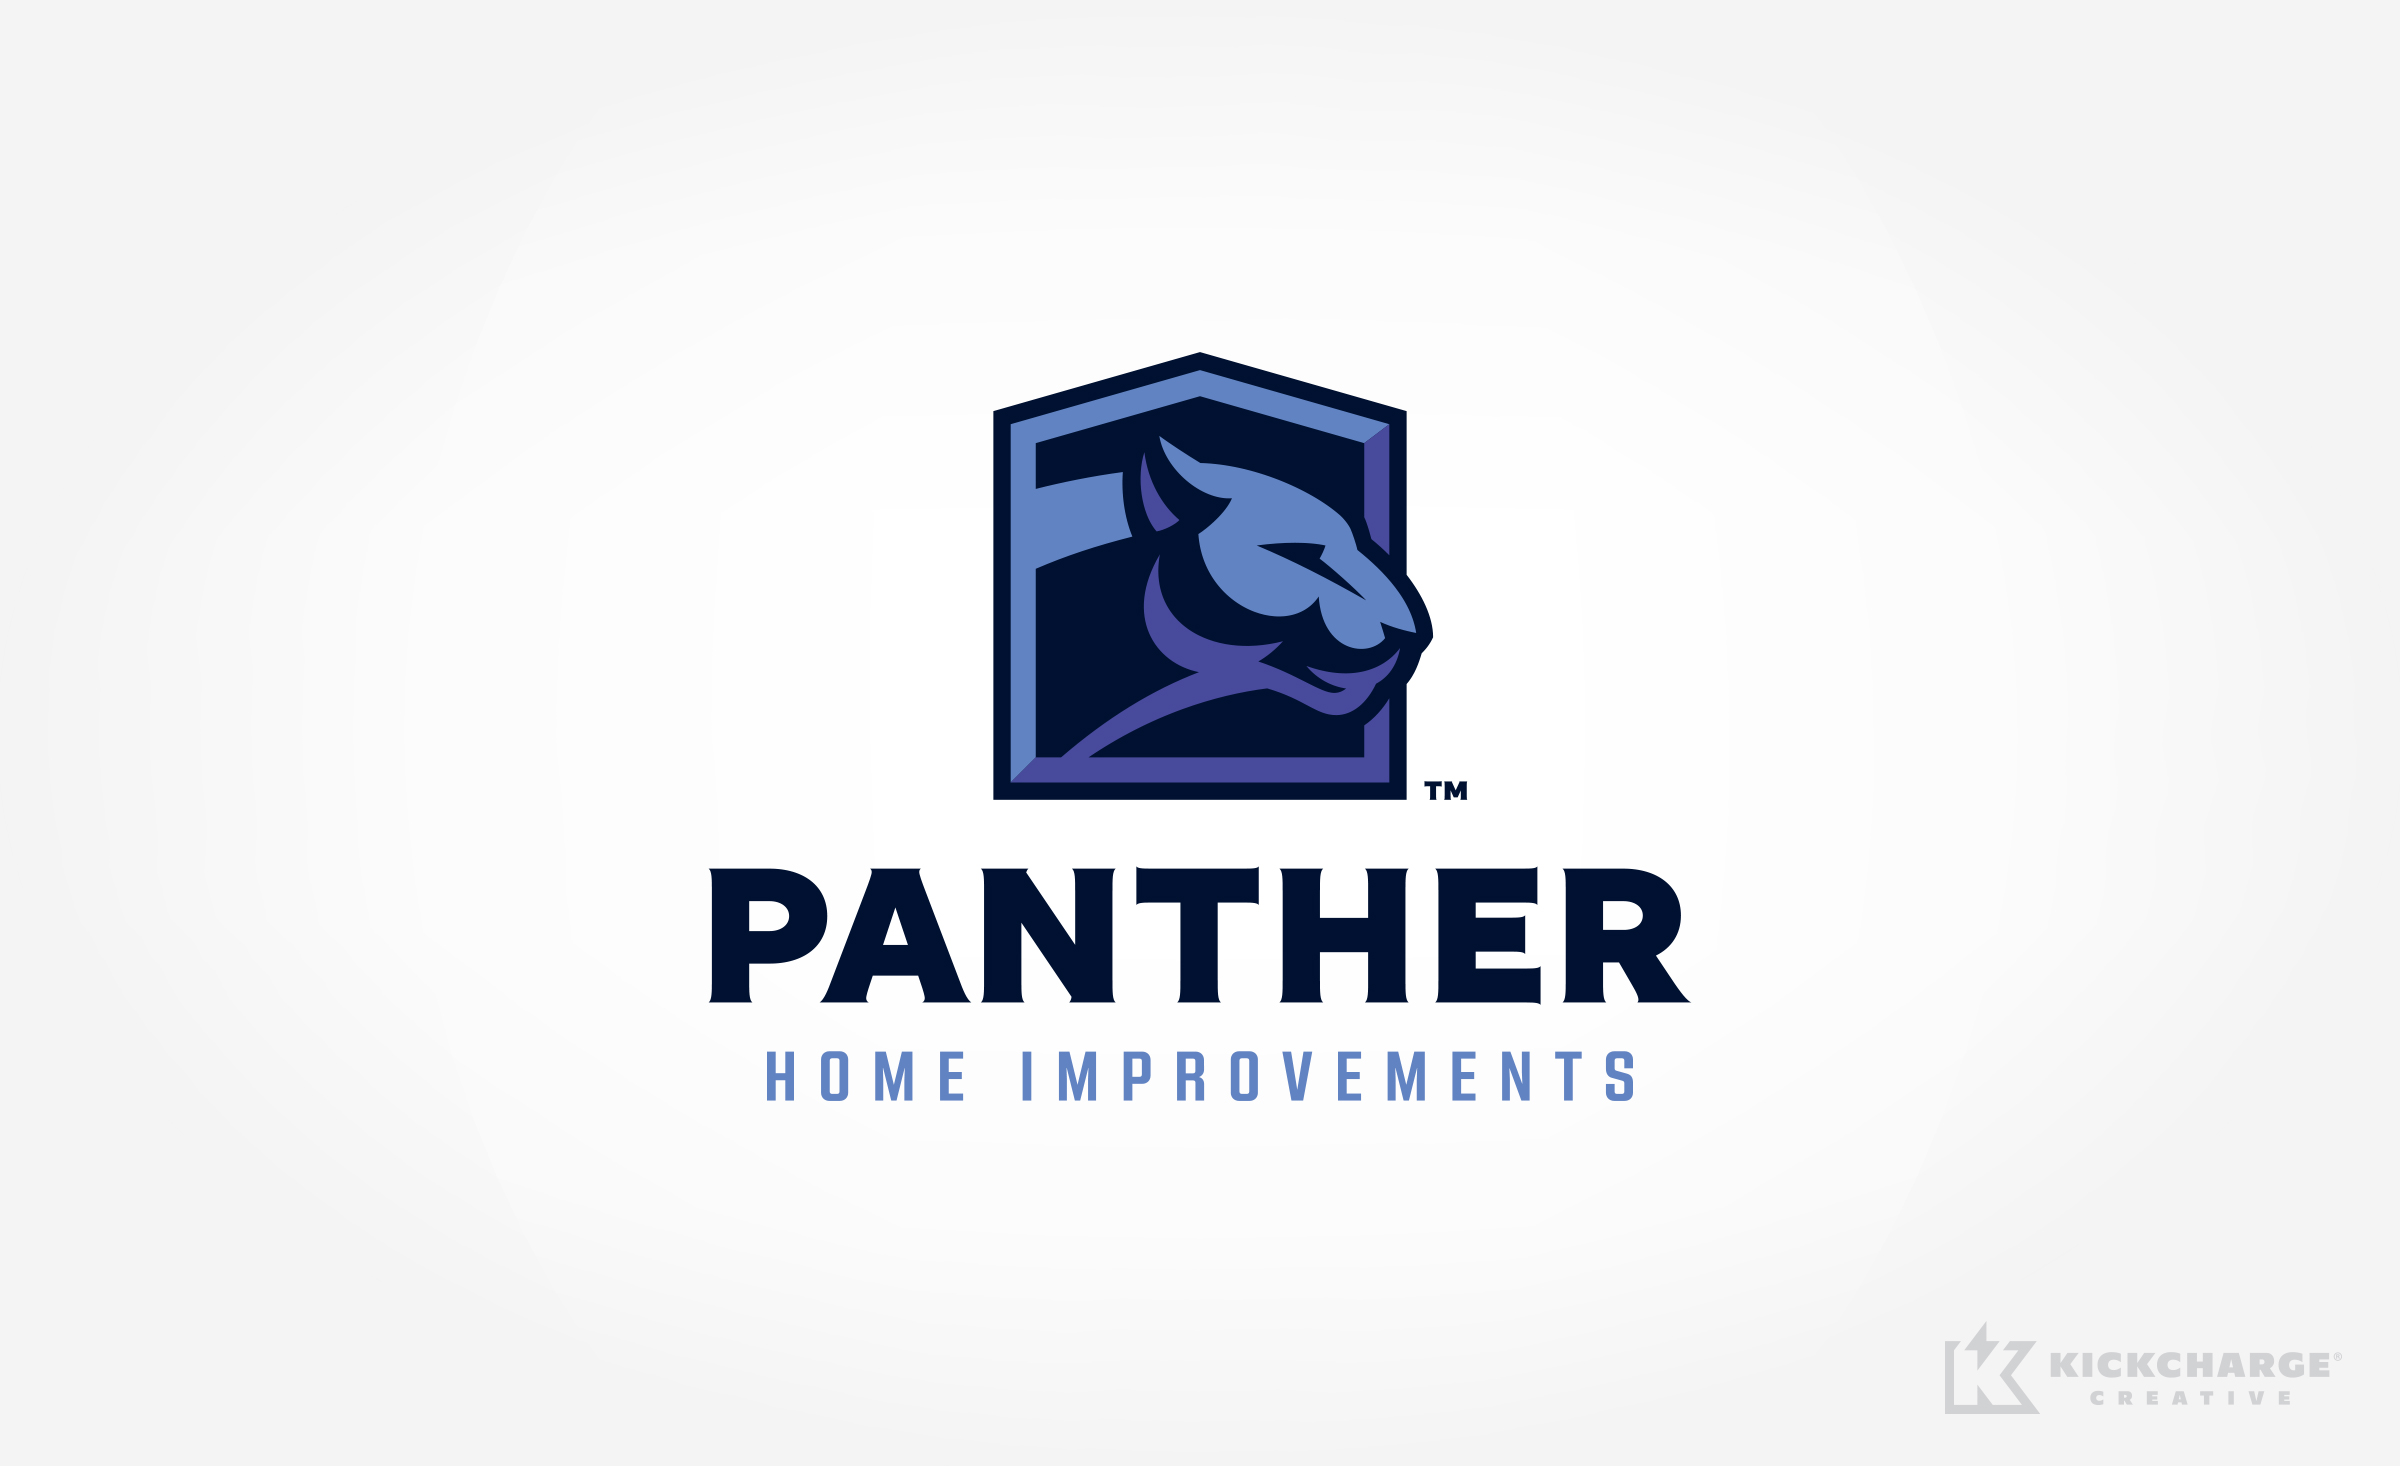 Panther Home Improvements